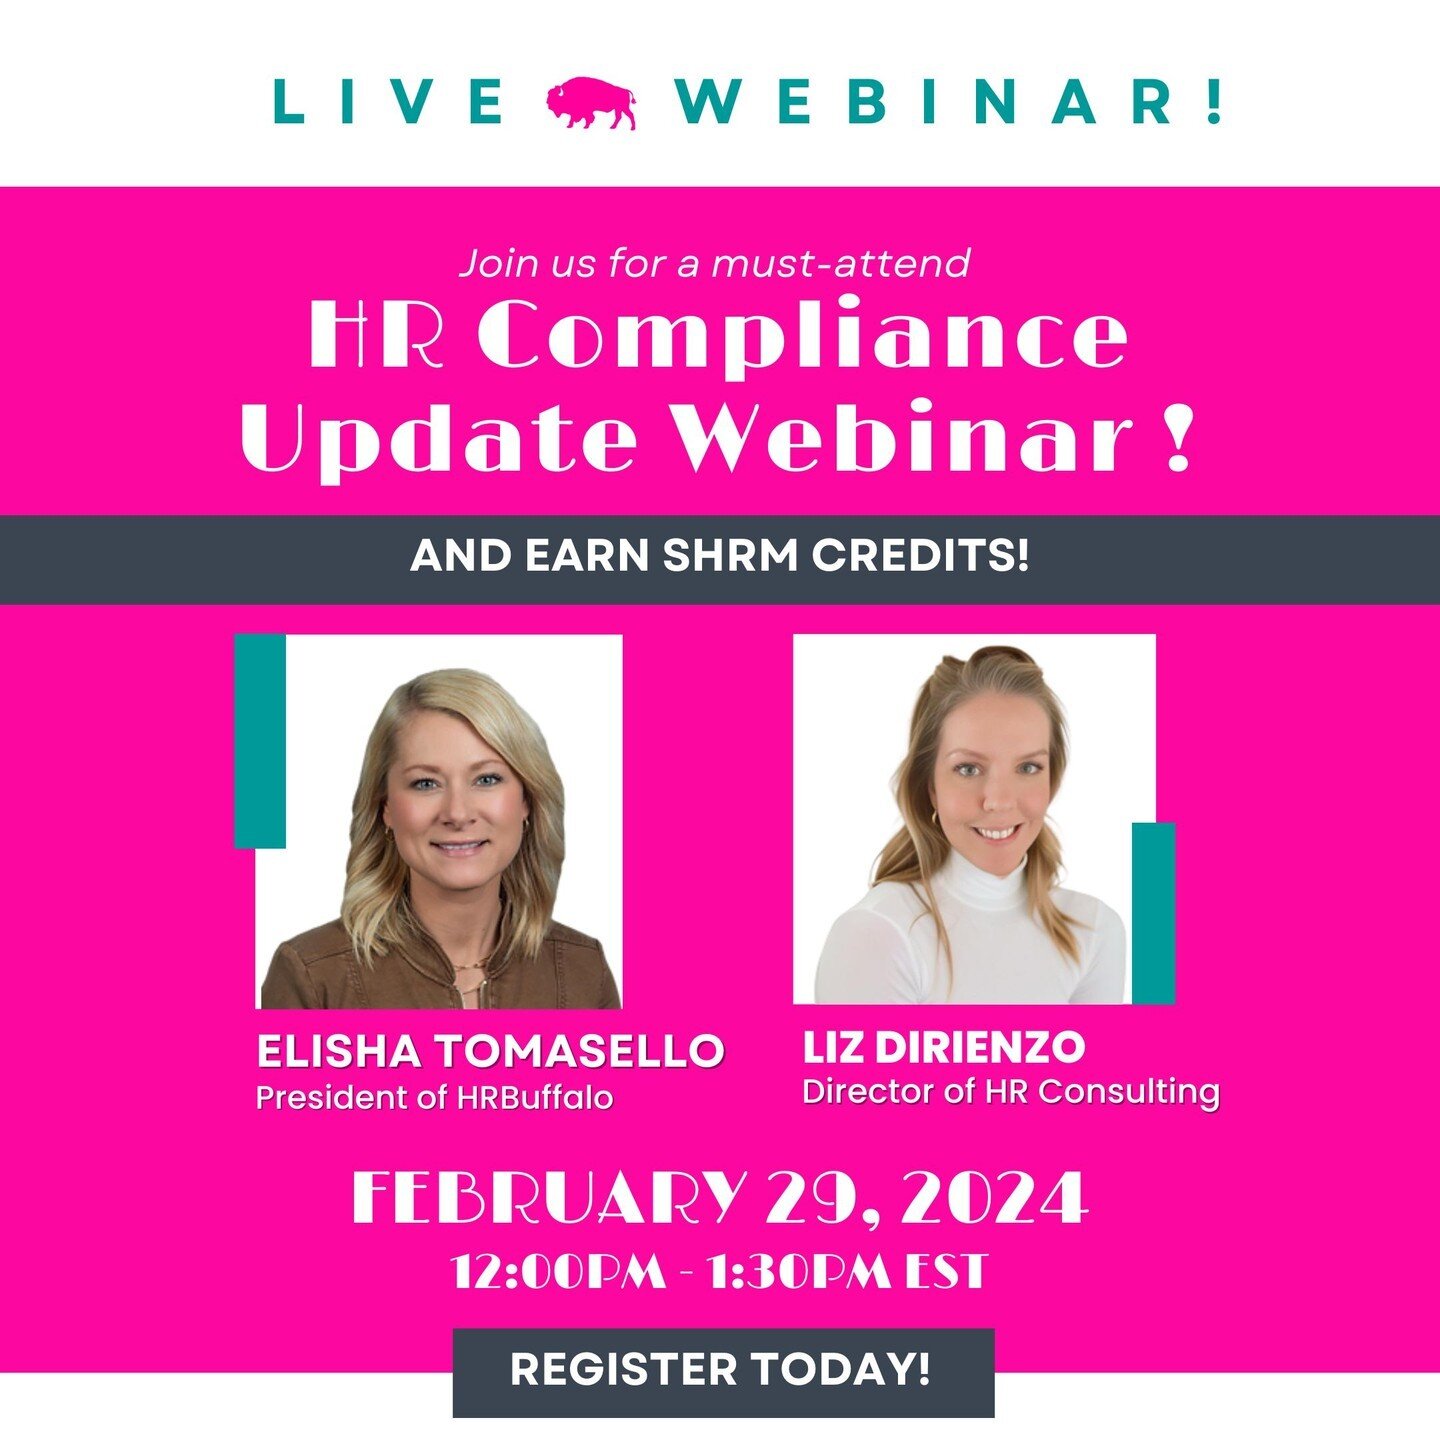 📢 Enhance your HR expertise and earn SHRM credits with our HR Compliance Update Webinar! Join us as we dive deep into exploring the latest compliance updates. 

Webinar Topics: 
➡️ Social media access restrictions 
➡️ Minimum wage changes 
➡️ Pay tr